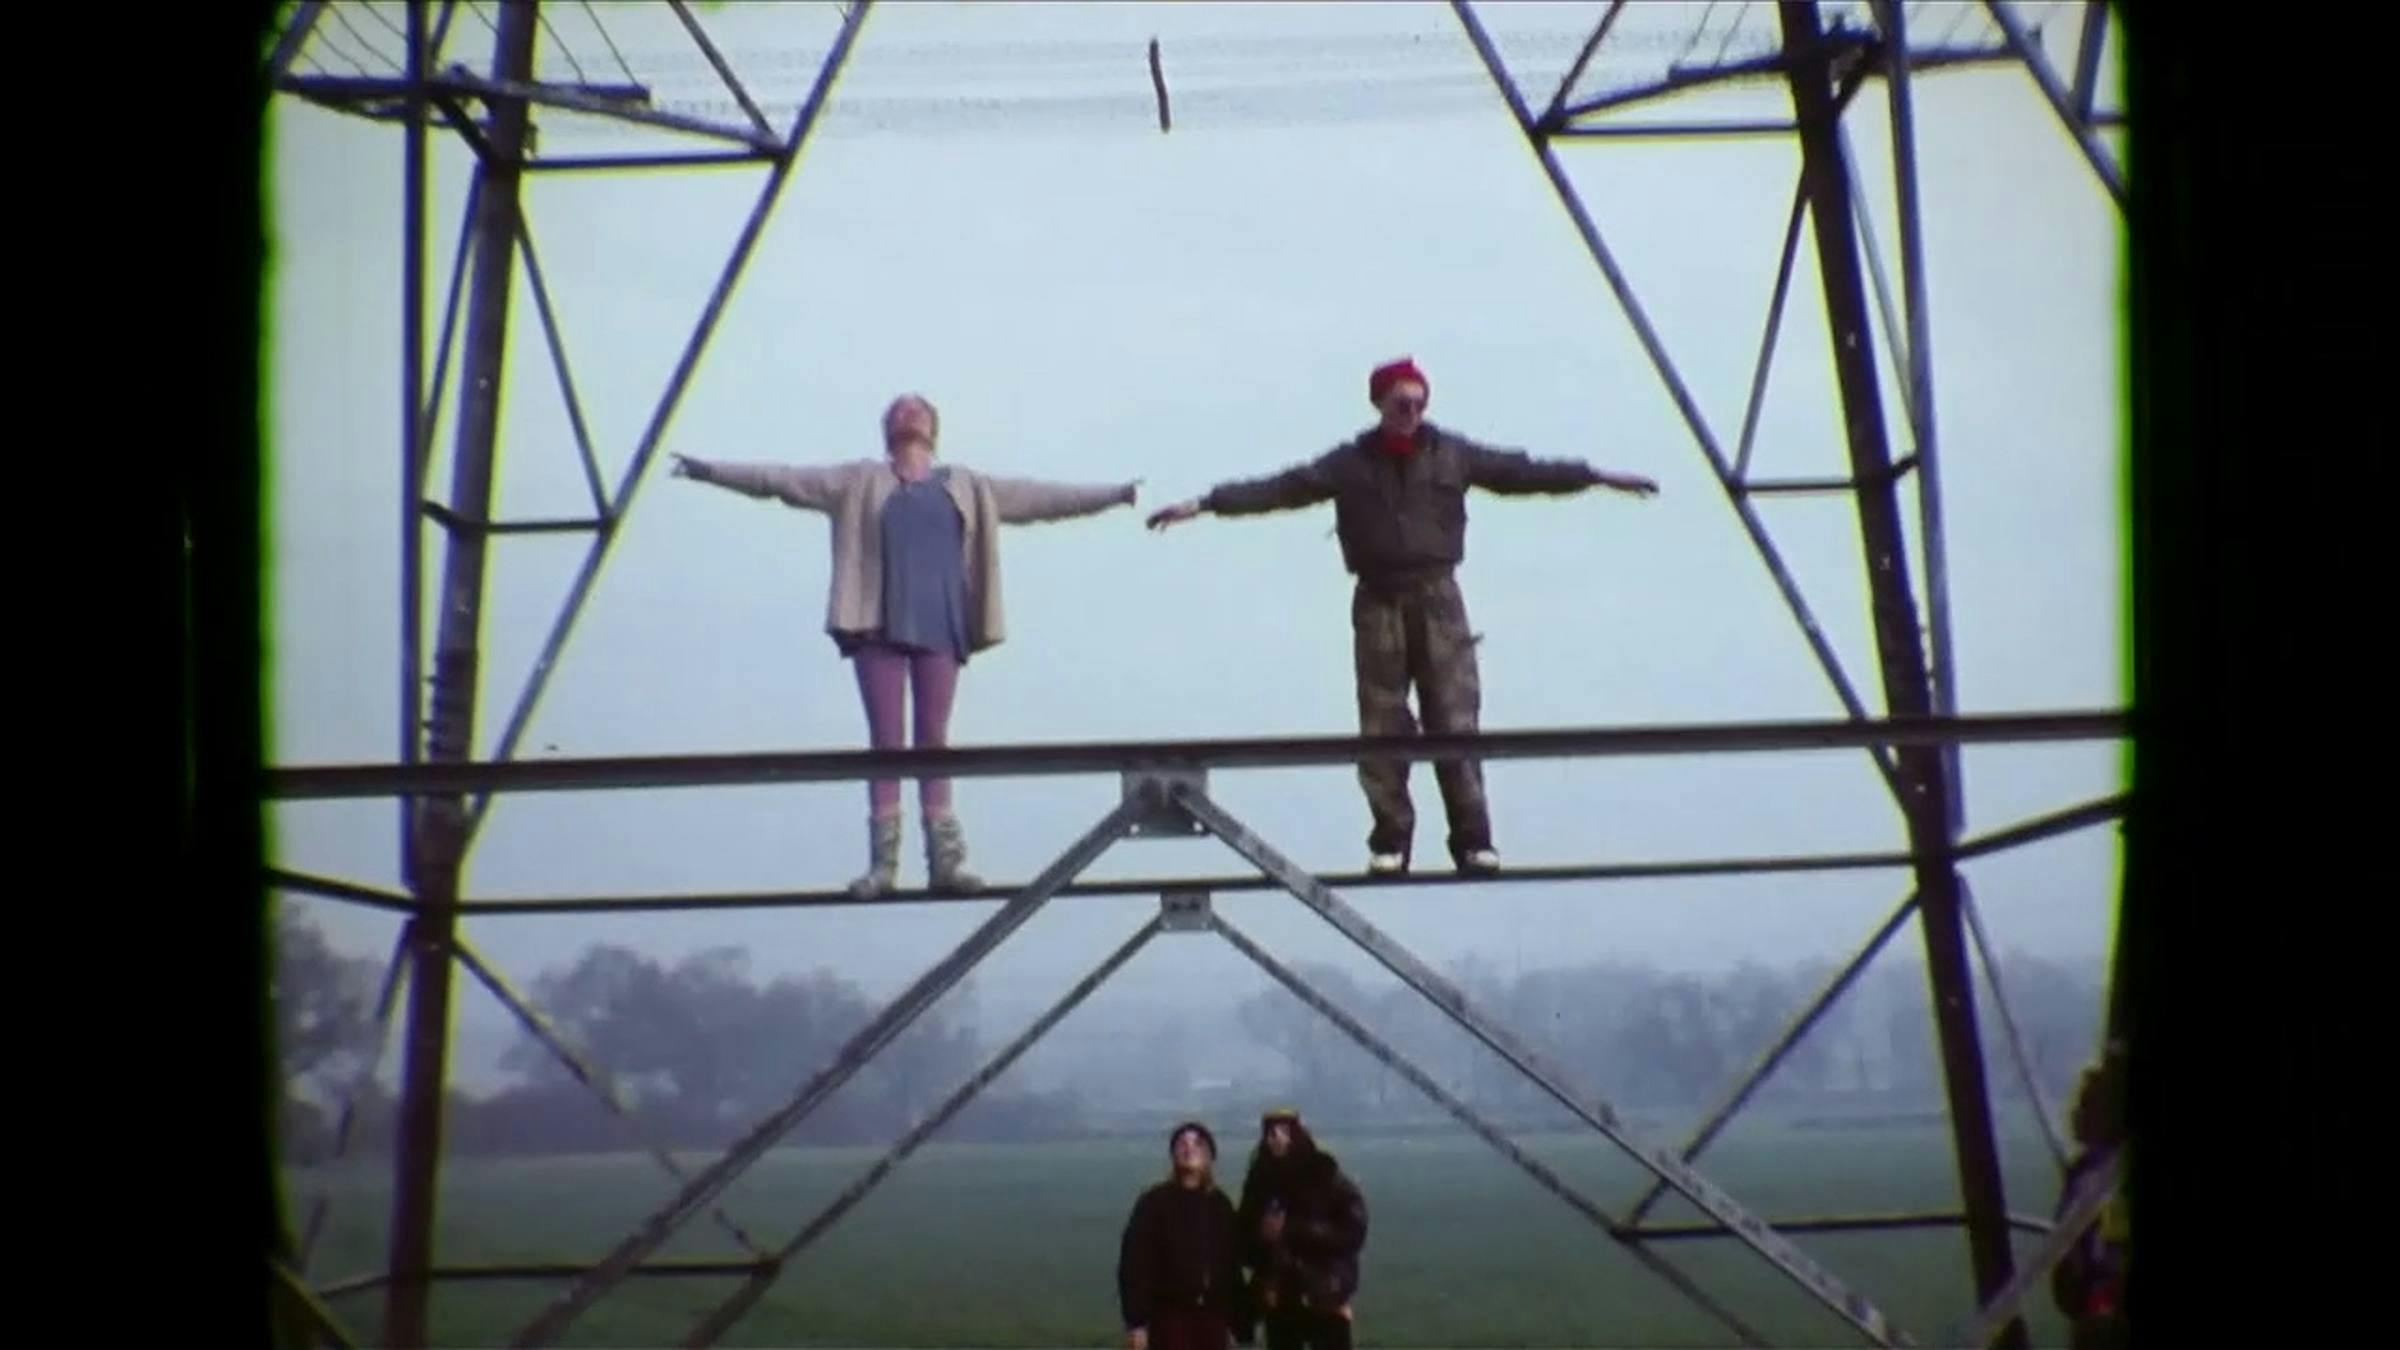 an image of 2 peole standing on a metal rung of an electrical pylon in a field. They have both of their arms out stretched. Two people on the ground are looking up at them